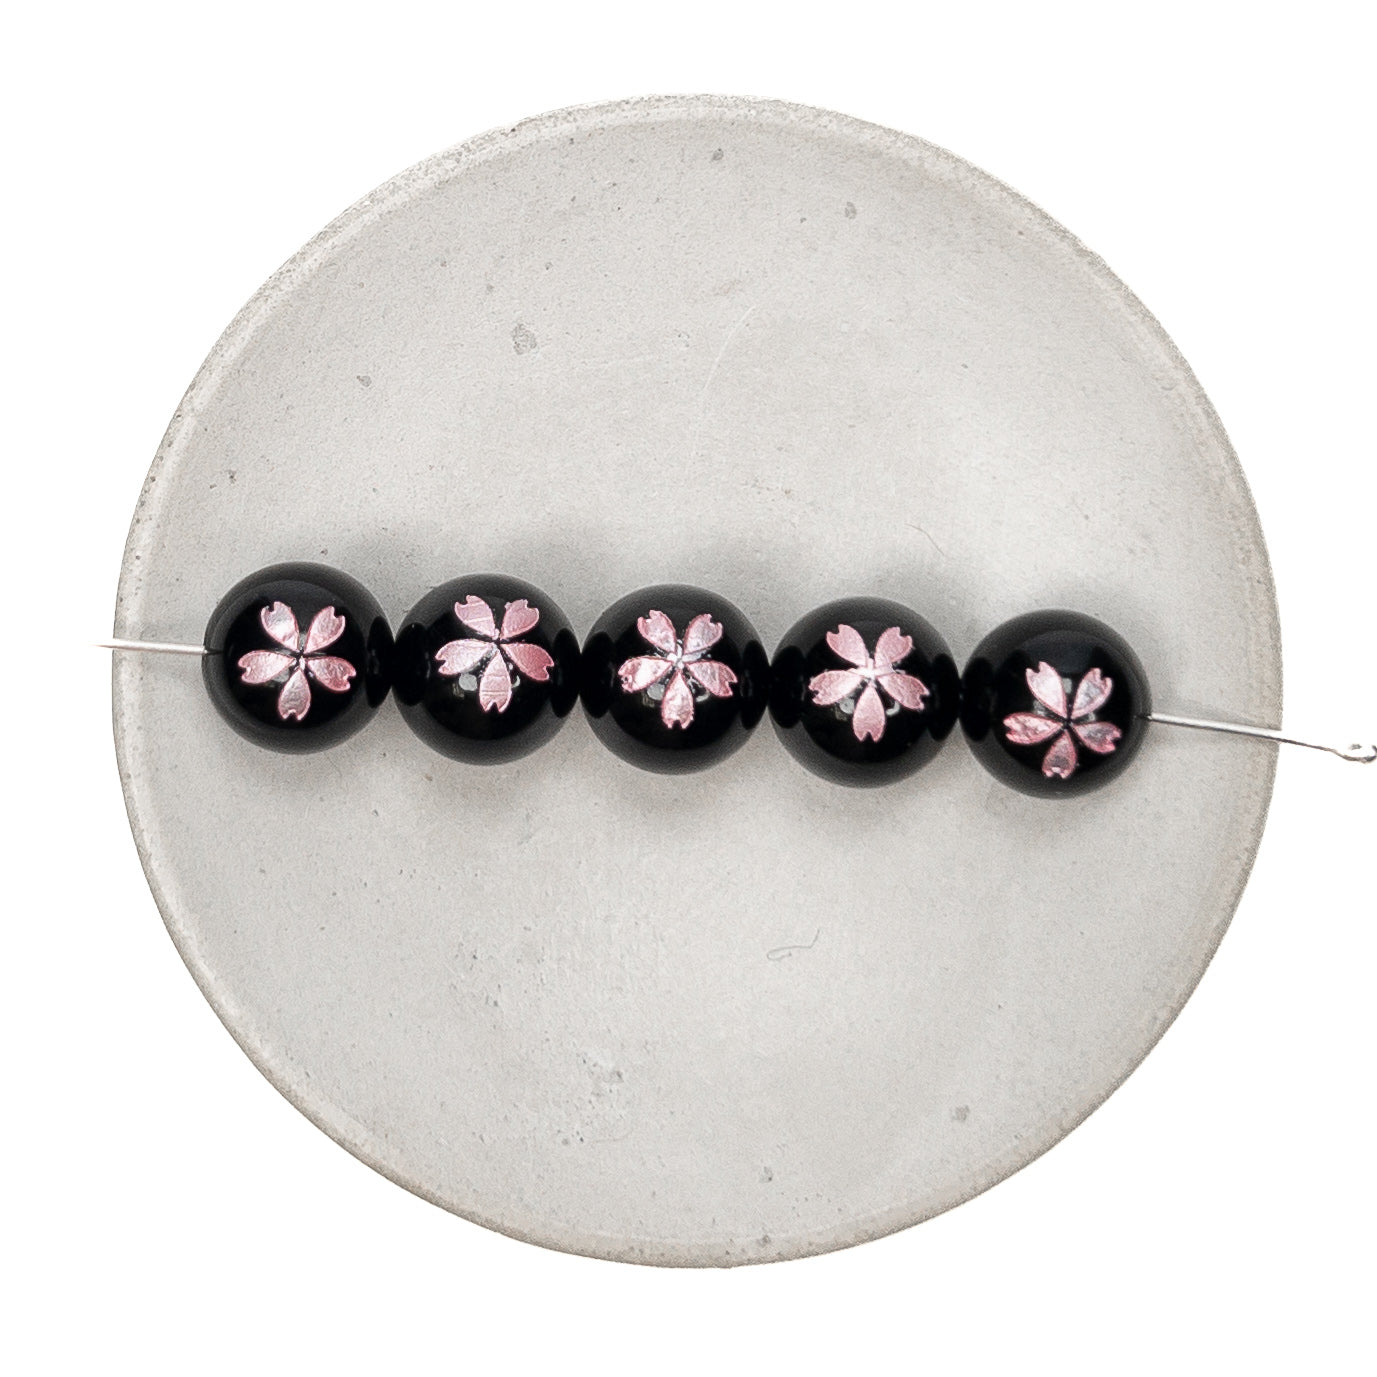 Black Agate with Etched Pink Sakura Blossom 10mm Round Bead - 1 pc.